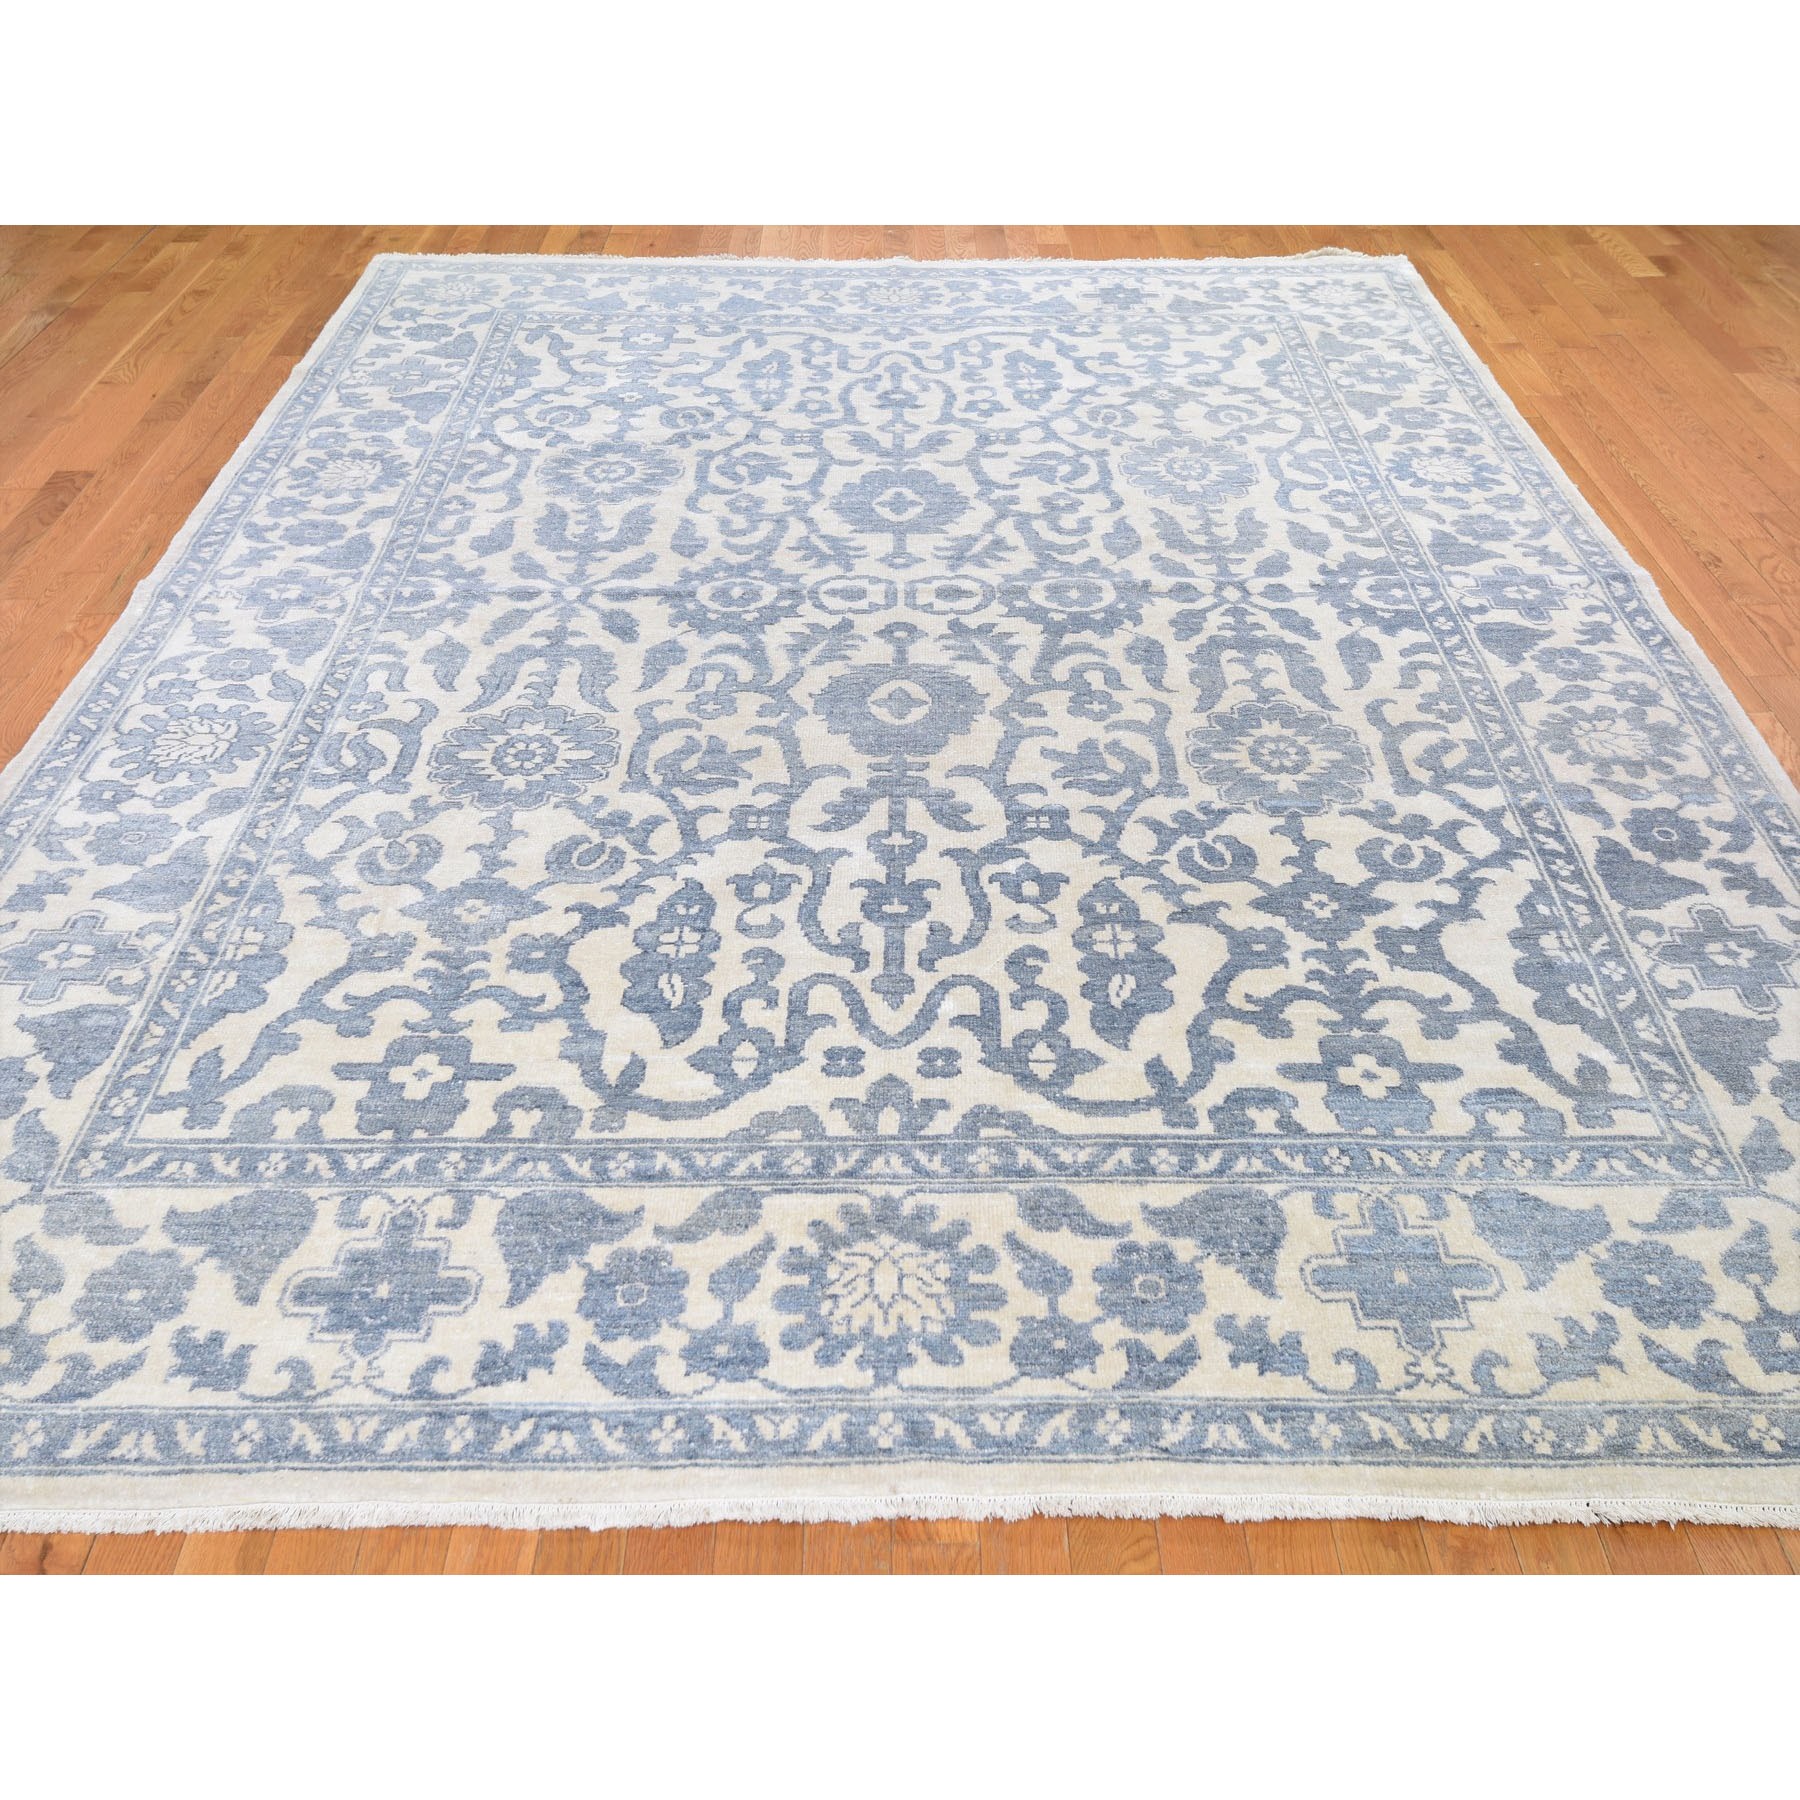 8-10 x12- Tone on Tone Art Silk Hand-Knotted Oushak Oriental Rug 